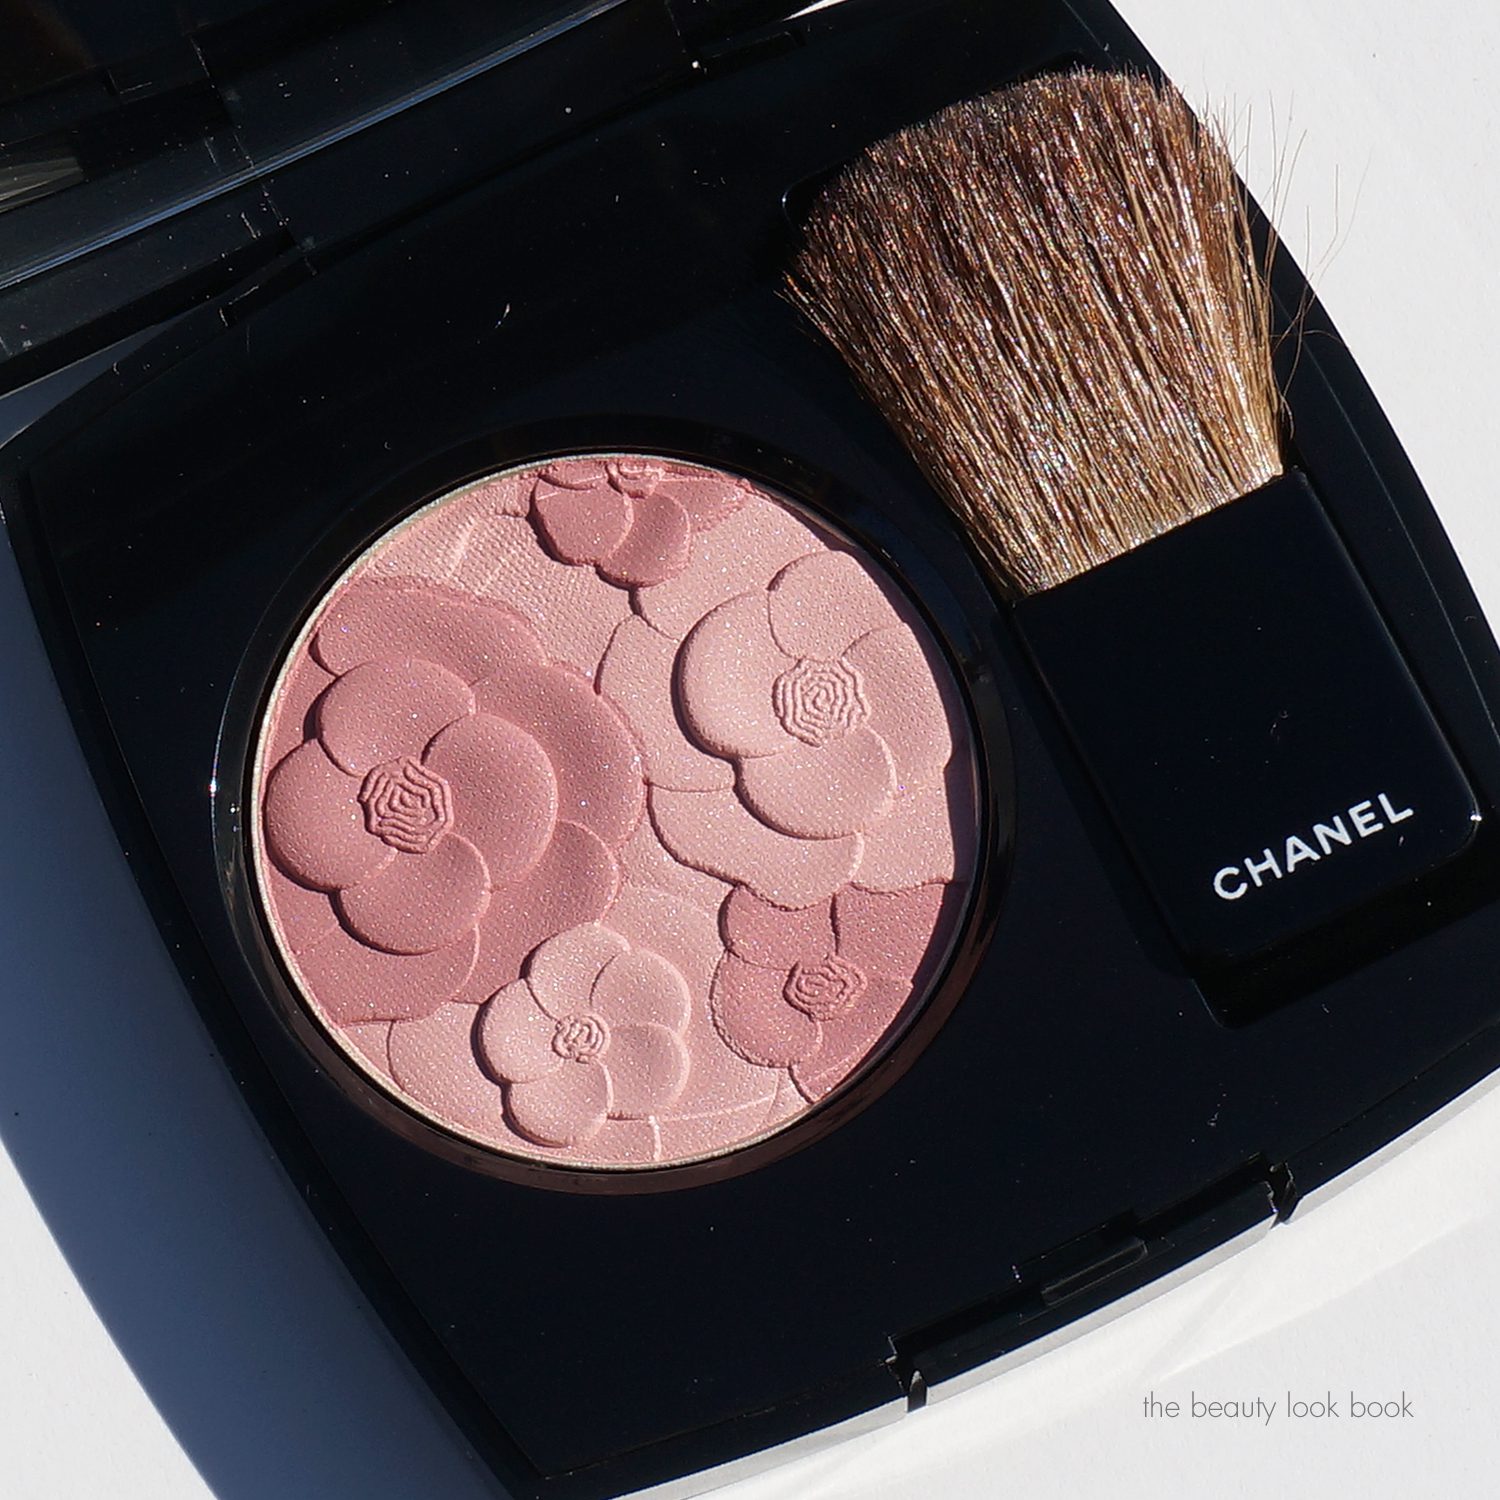 Blush Archives - Page 6 of 24 - The Beauty Look Book